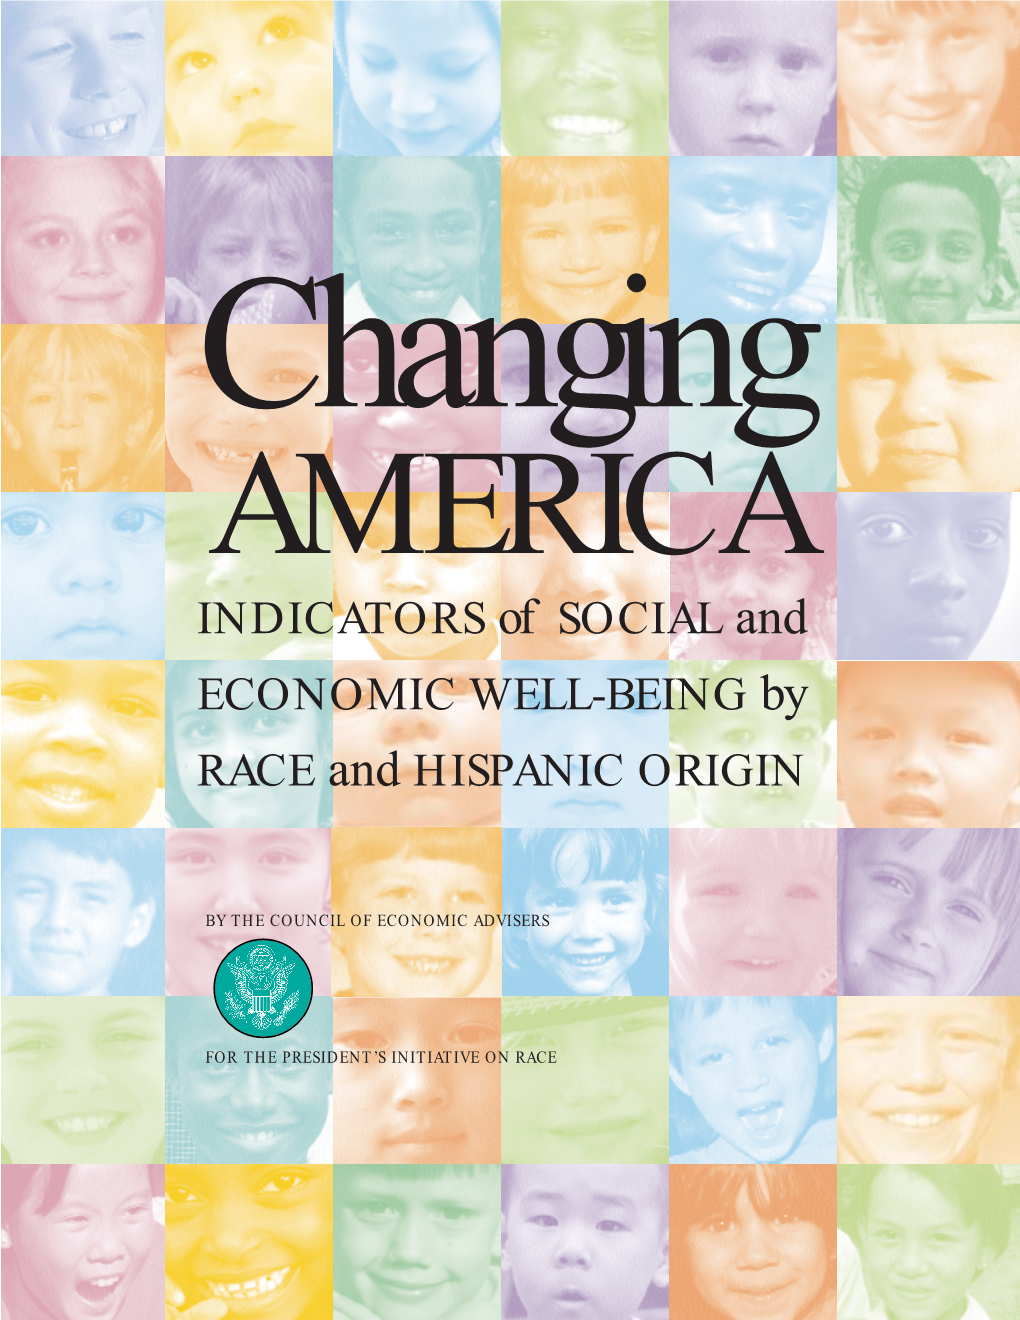 Changing America: Indicators of Social and Economic Well-Being by Race and Hispanic Origin